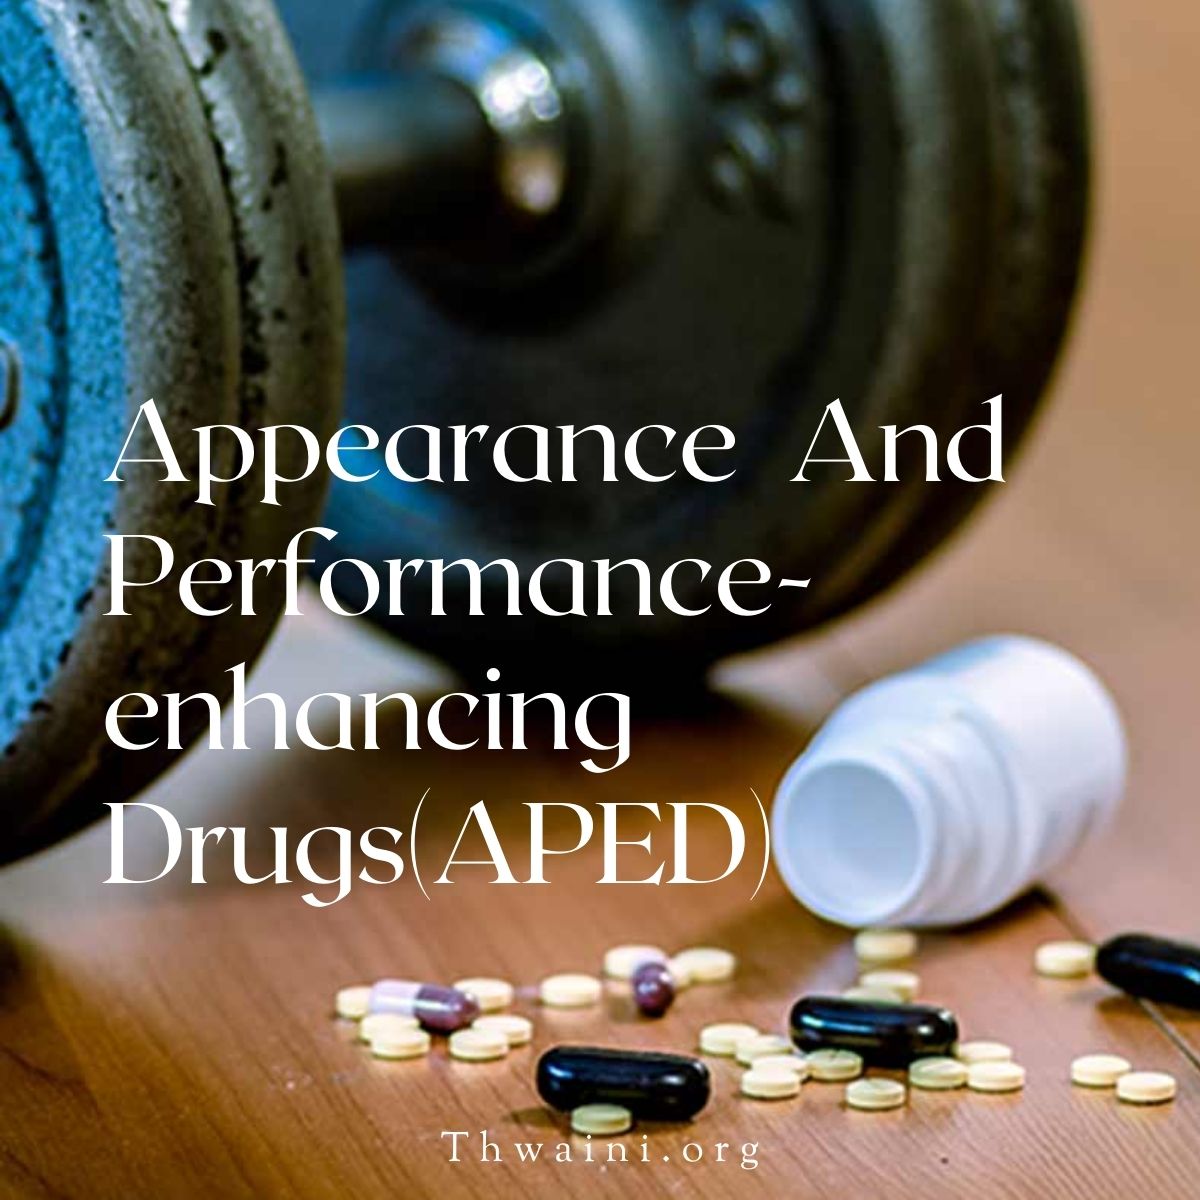 Appearance and Performance-enhancing Drugs(APED)